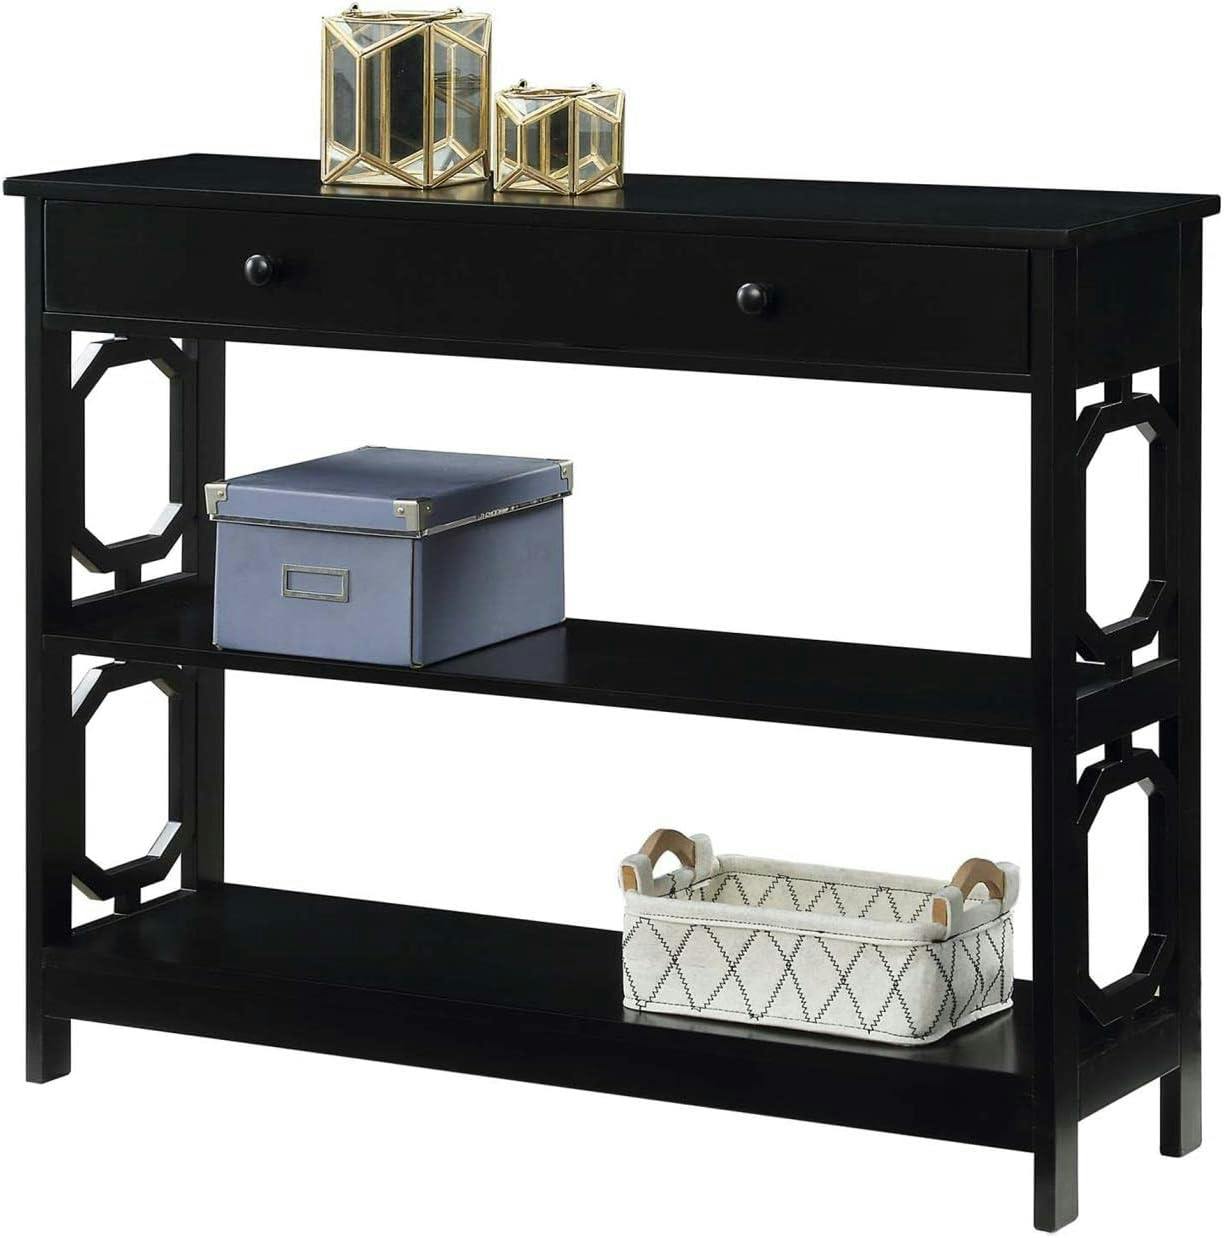 Omega Black Wood Console Table with Storage and Geometric Design